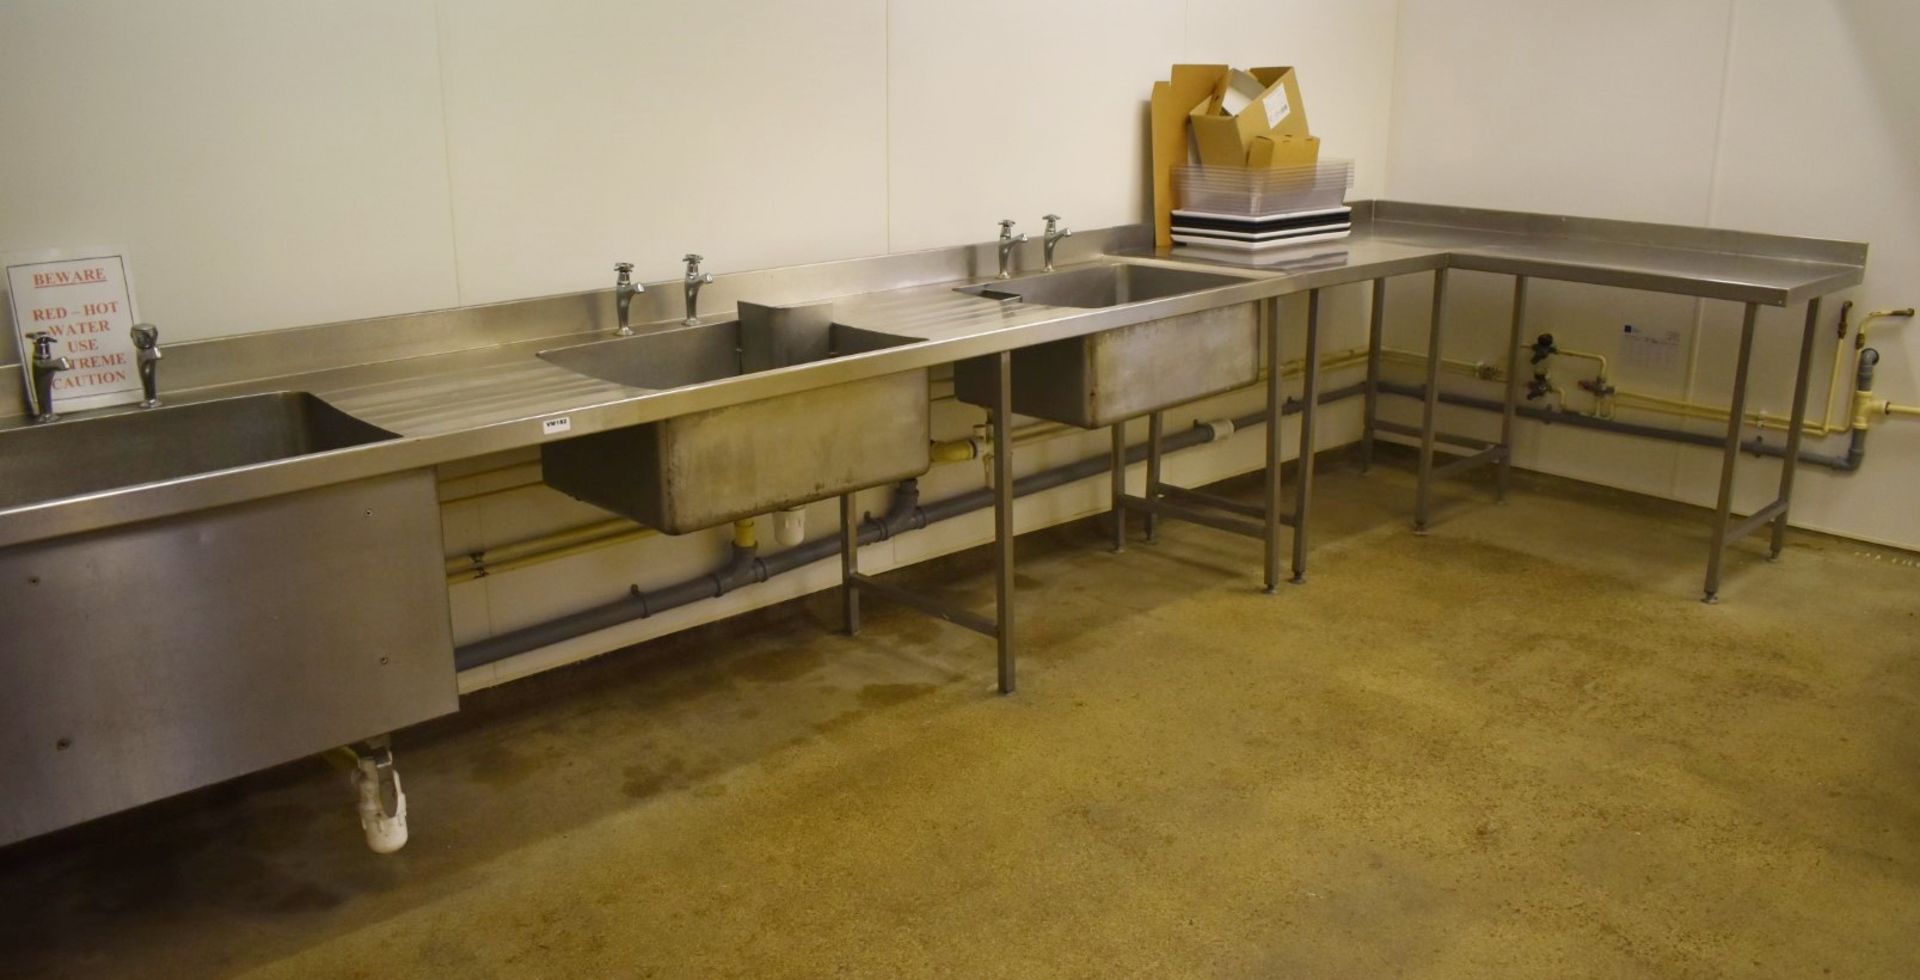 1 x Stainless Steel Wash Station With Two Wash Basins and One EWB Boiling Water Basin - Approx 18